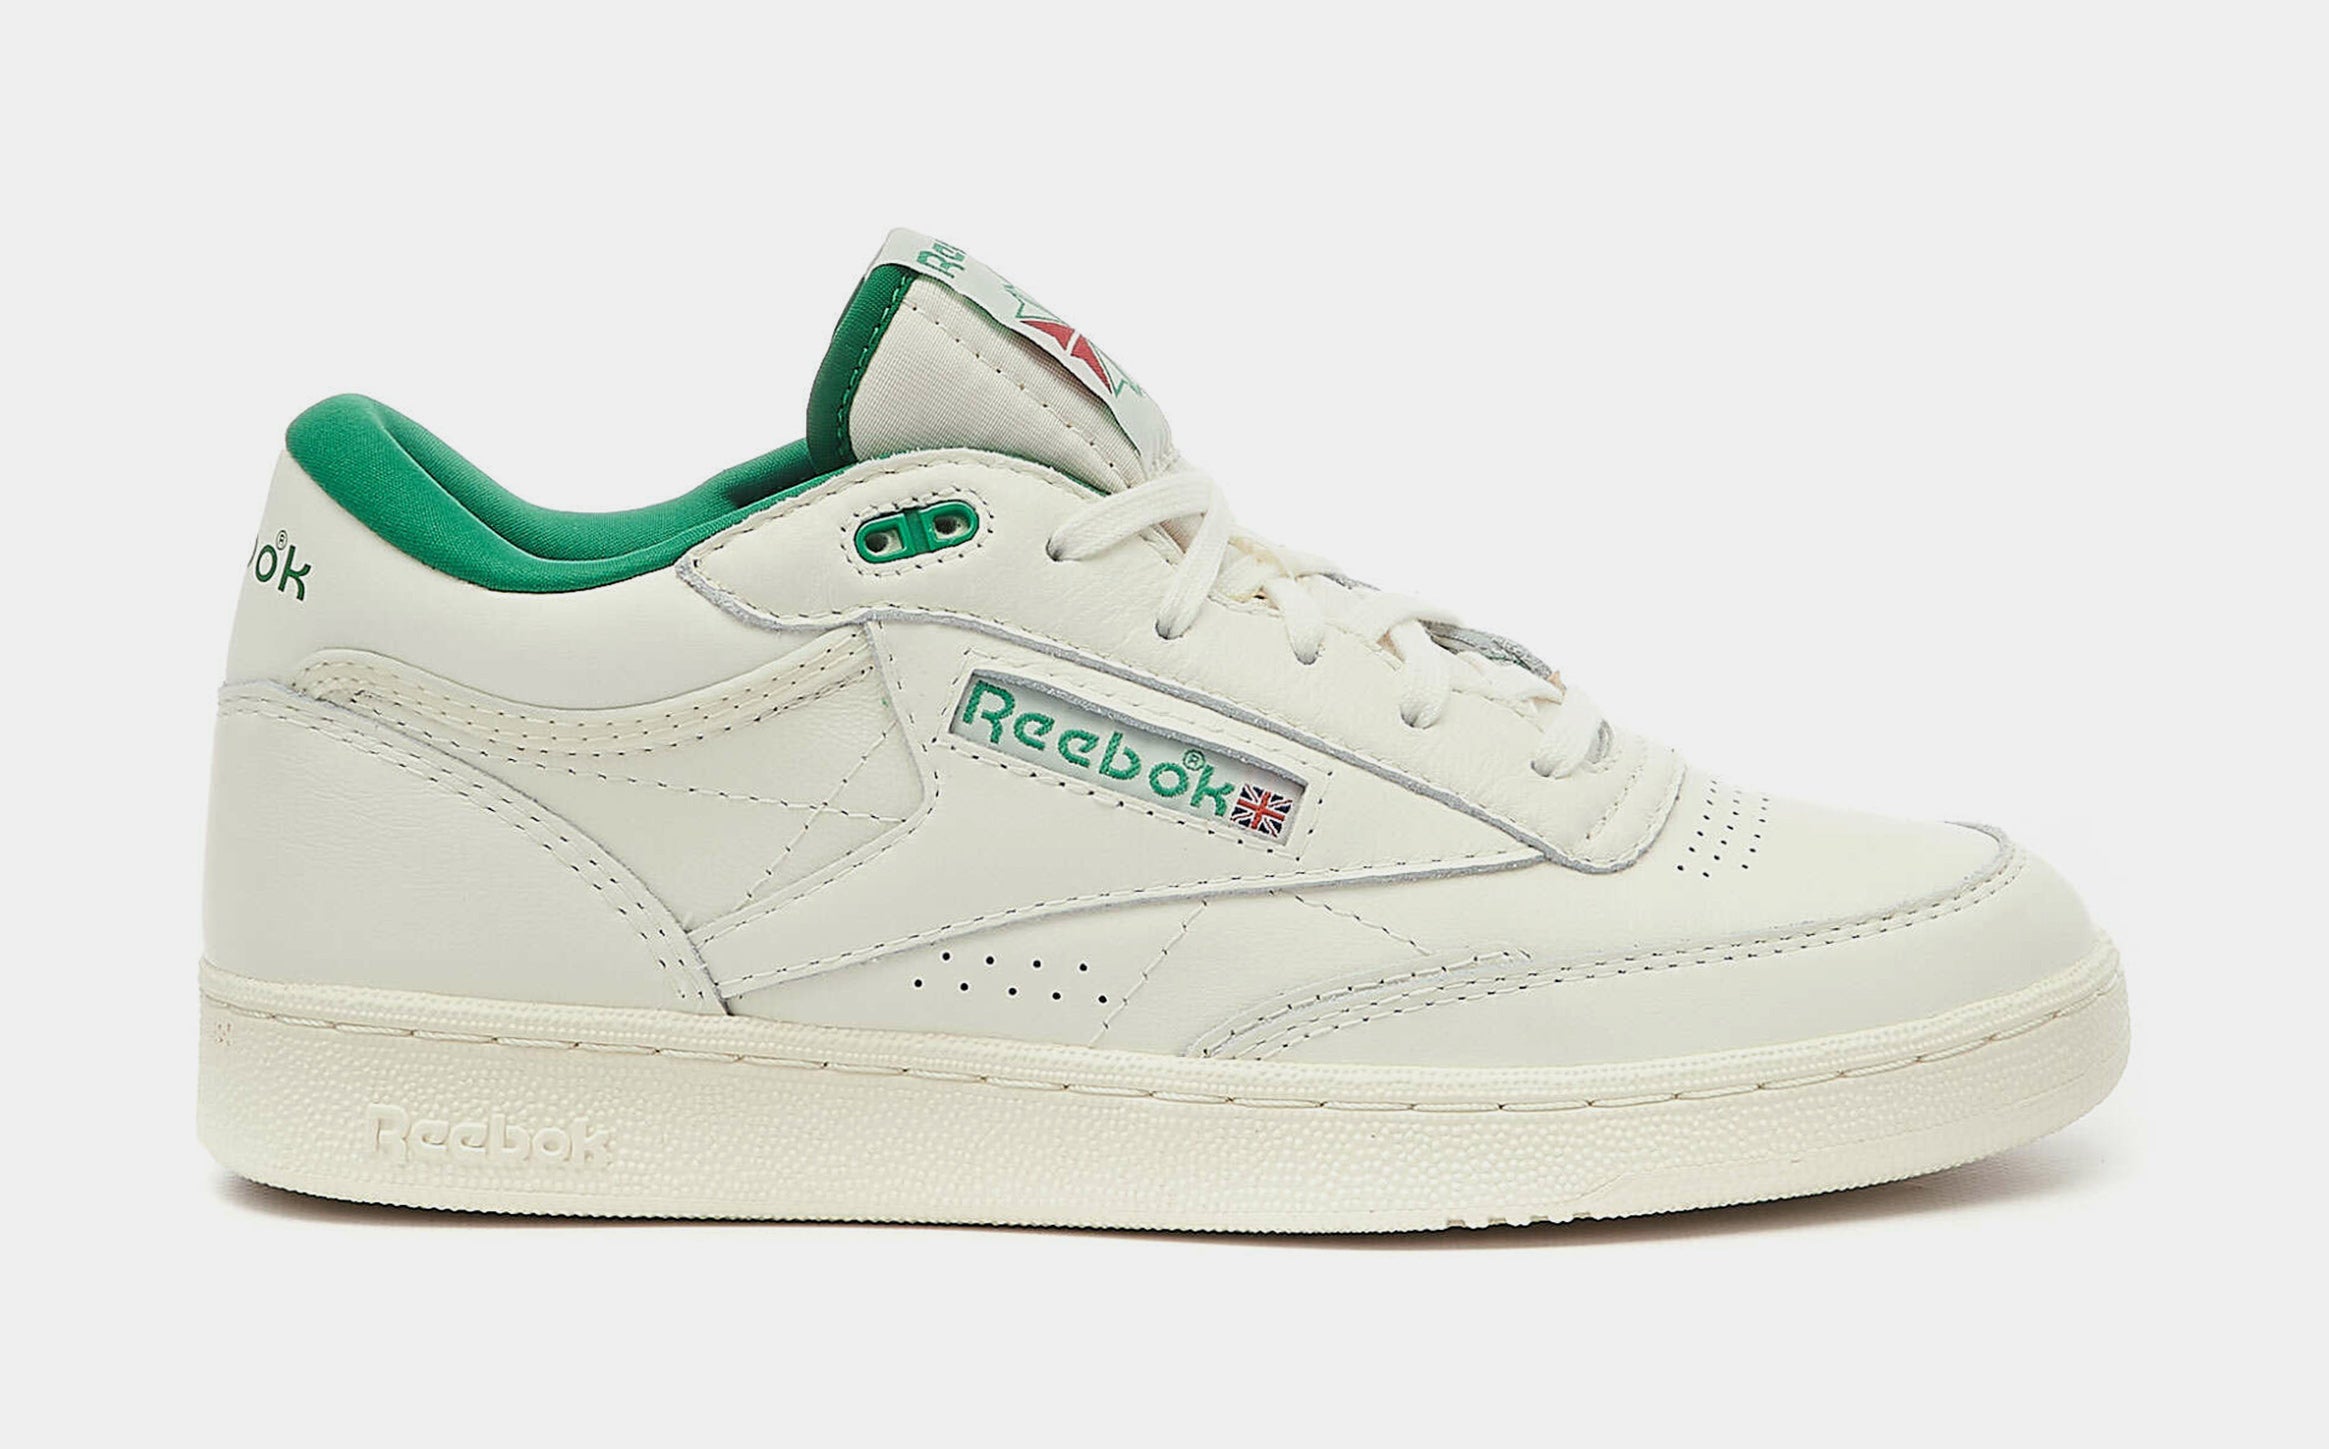 Tom Audreath notificación residuo Reebok Club C Mid II Mens Lifestyle Shoes White H68833 – Shoe Palace